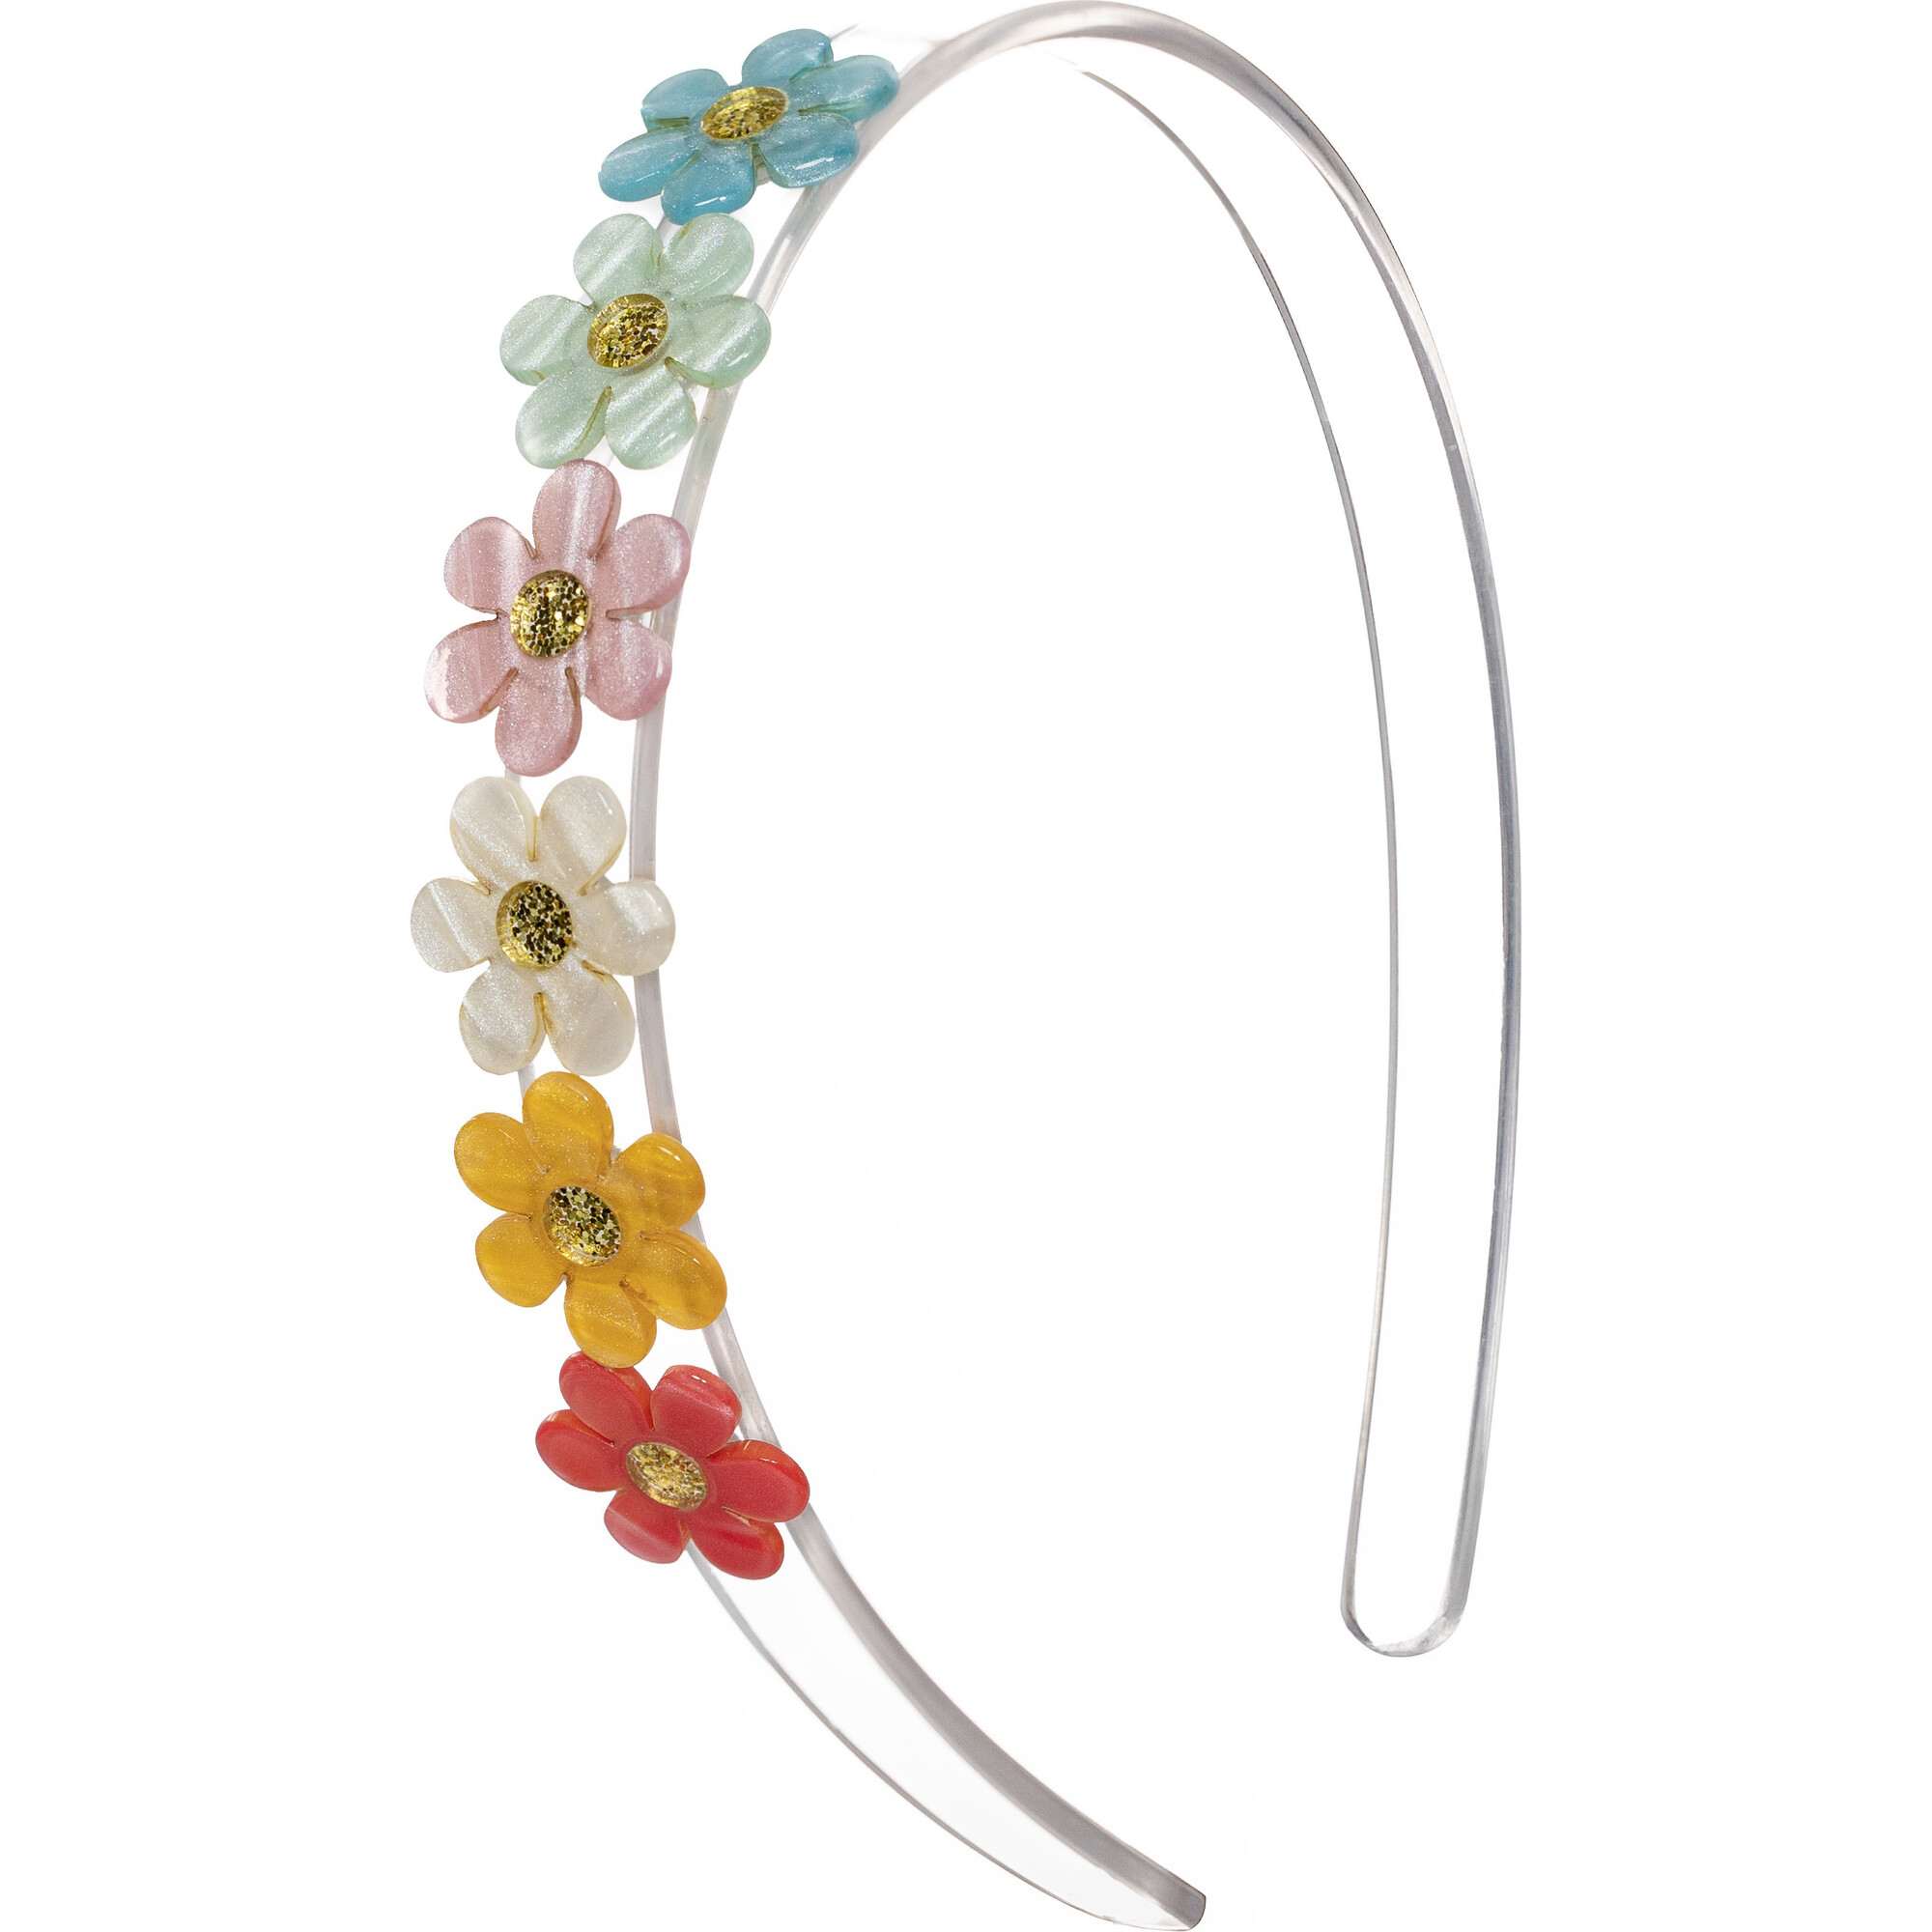 Lilies & Roses Centipede Hearts Candy Headband for Girls